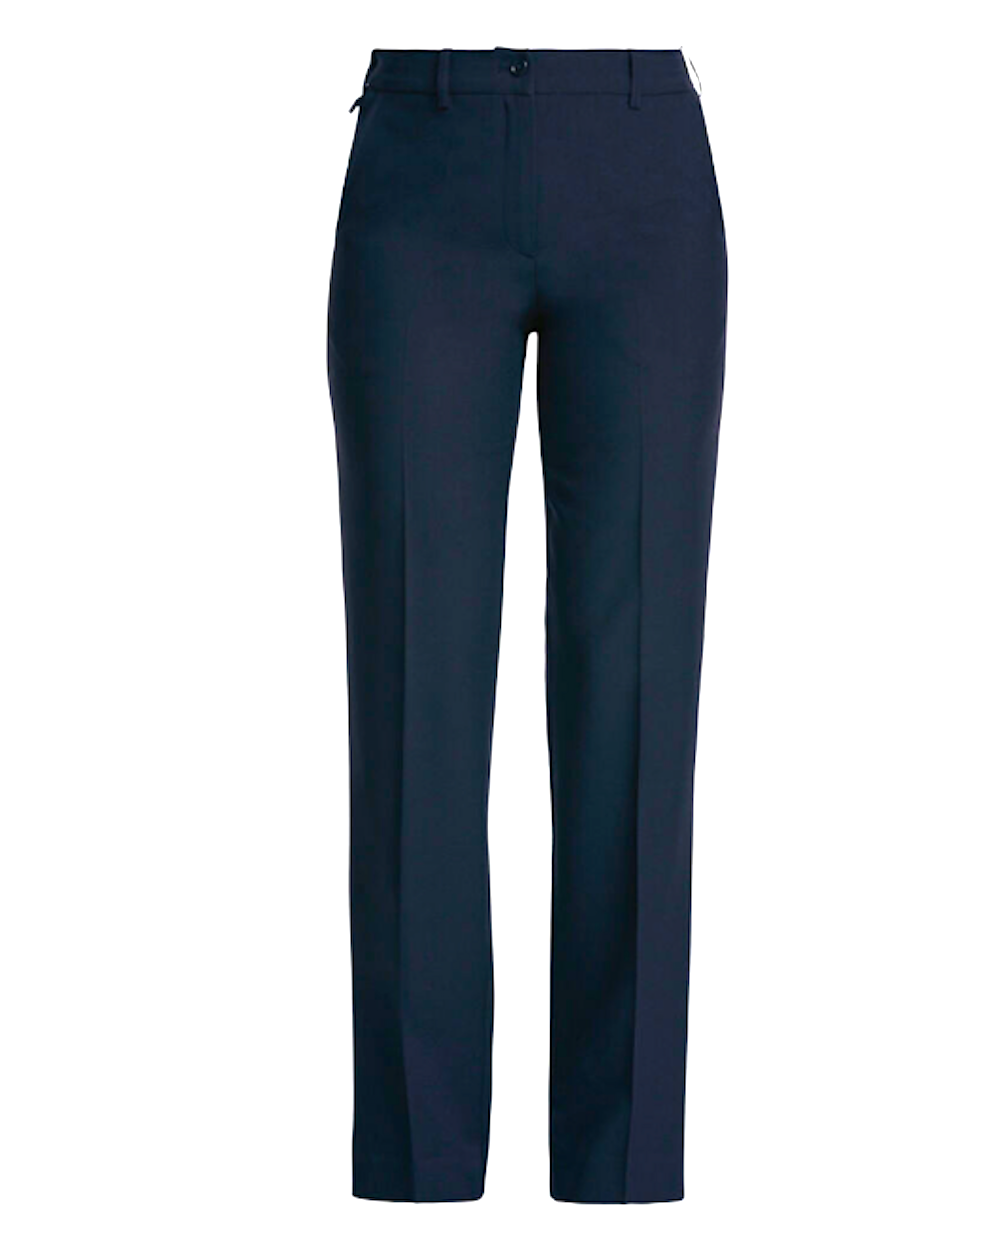 Cotton Narrow Fit Ladies Black Formal Pants, 30.0 at Rs 250/piece in  Ghaziabad